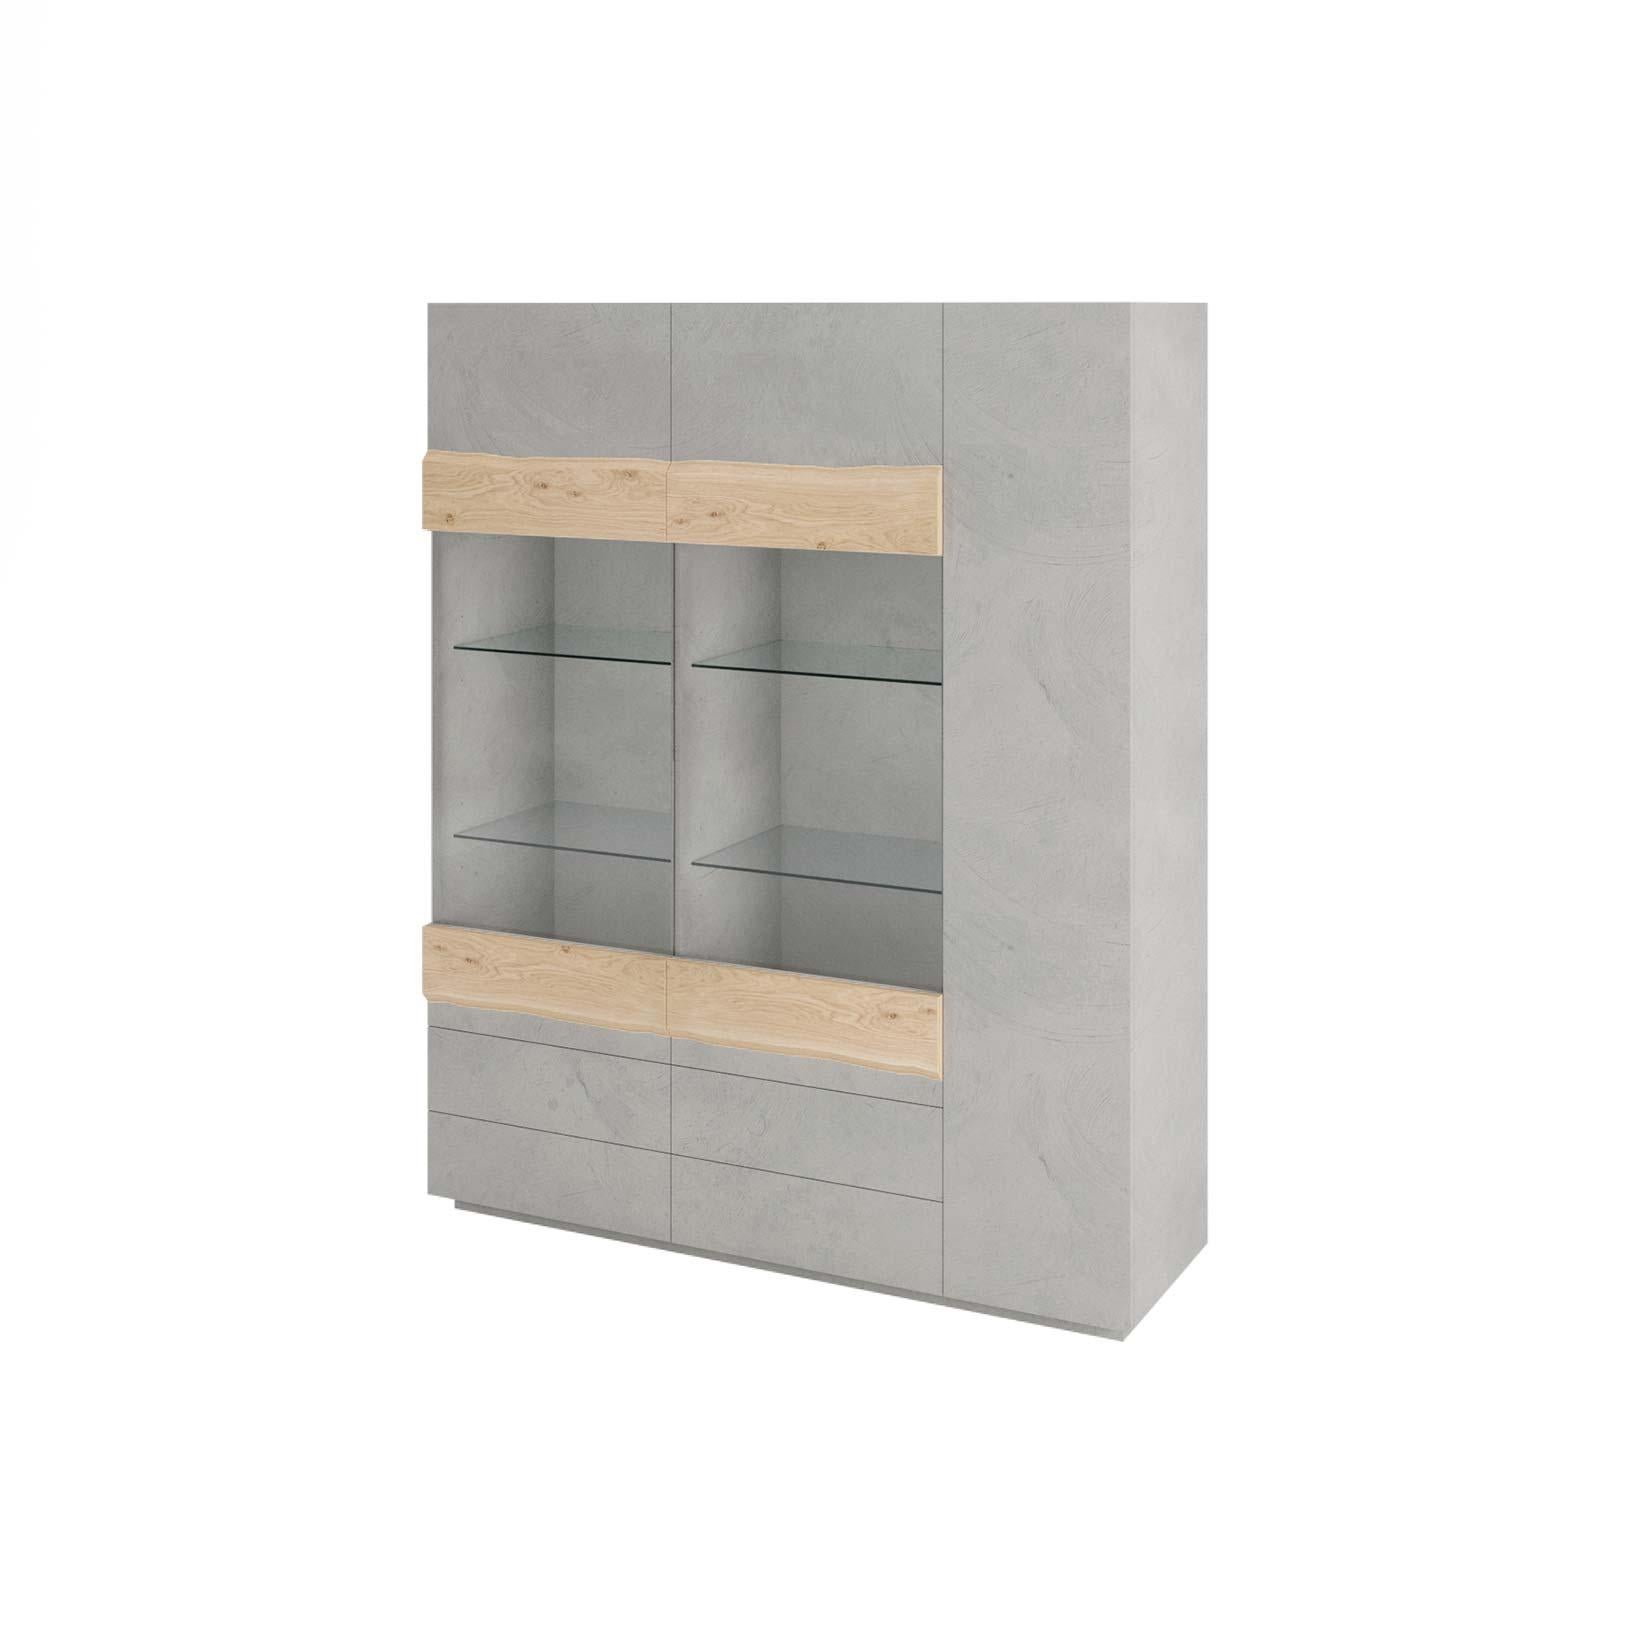 Woodland 3-door vitrine with concrete finishing.
You can check for other standard variations in our catalog and feel free to request your custom quote.

The Woodland collection brings the essence of free and relaxed style to your home, through